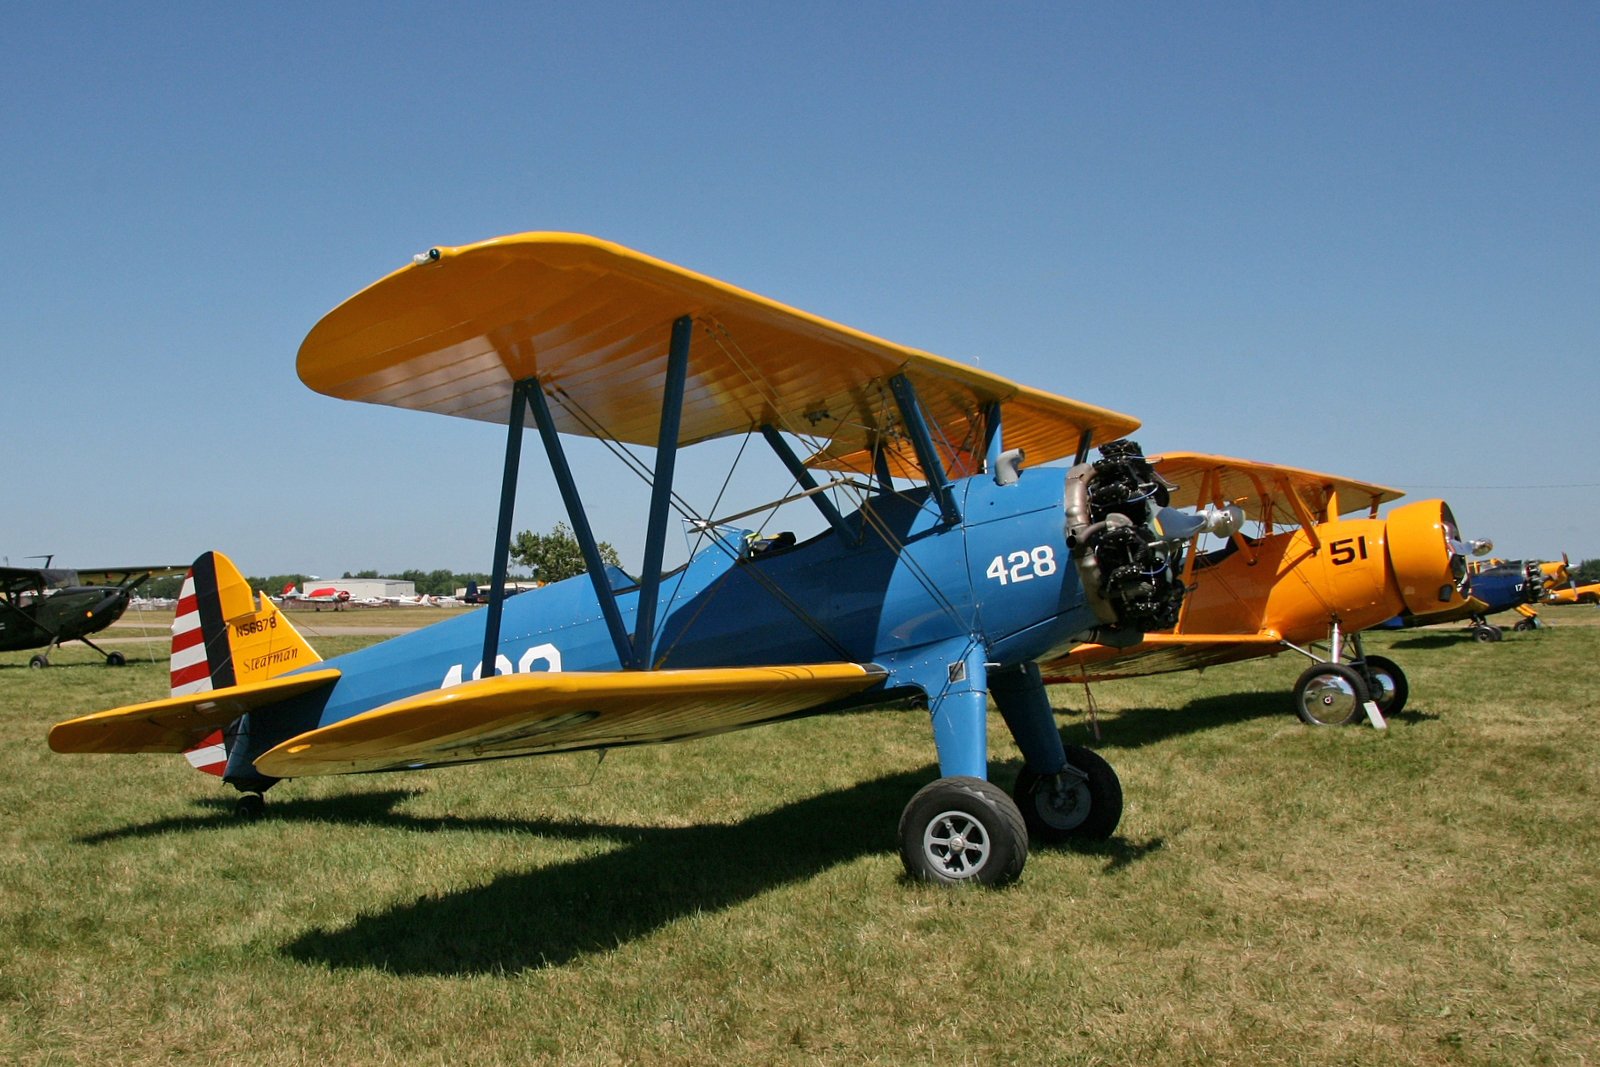 a yellow and blue airplane on display in the grass